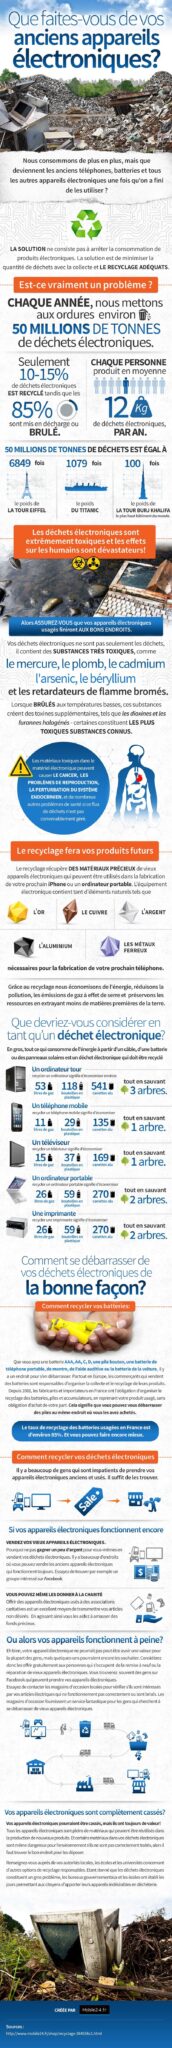 FINAL_Infographic_FR